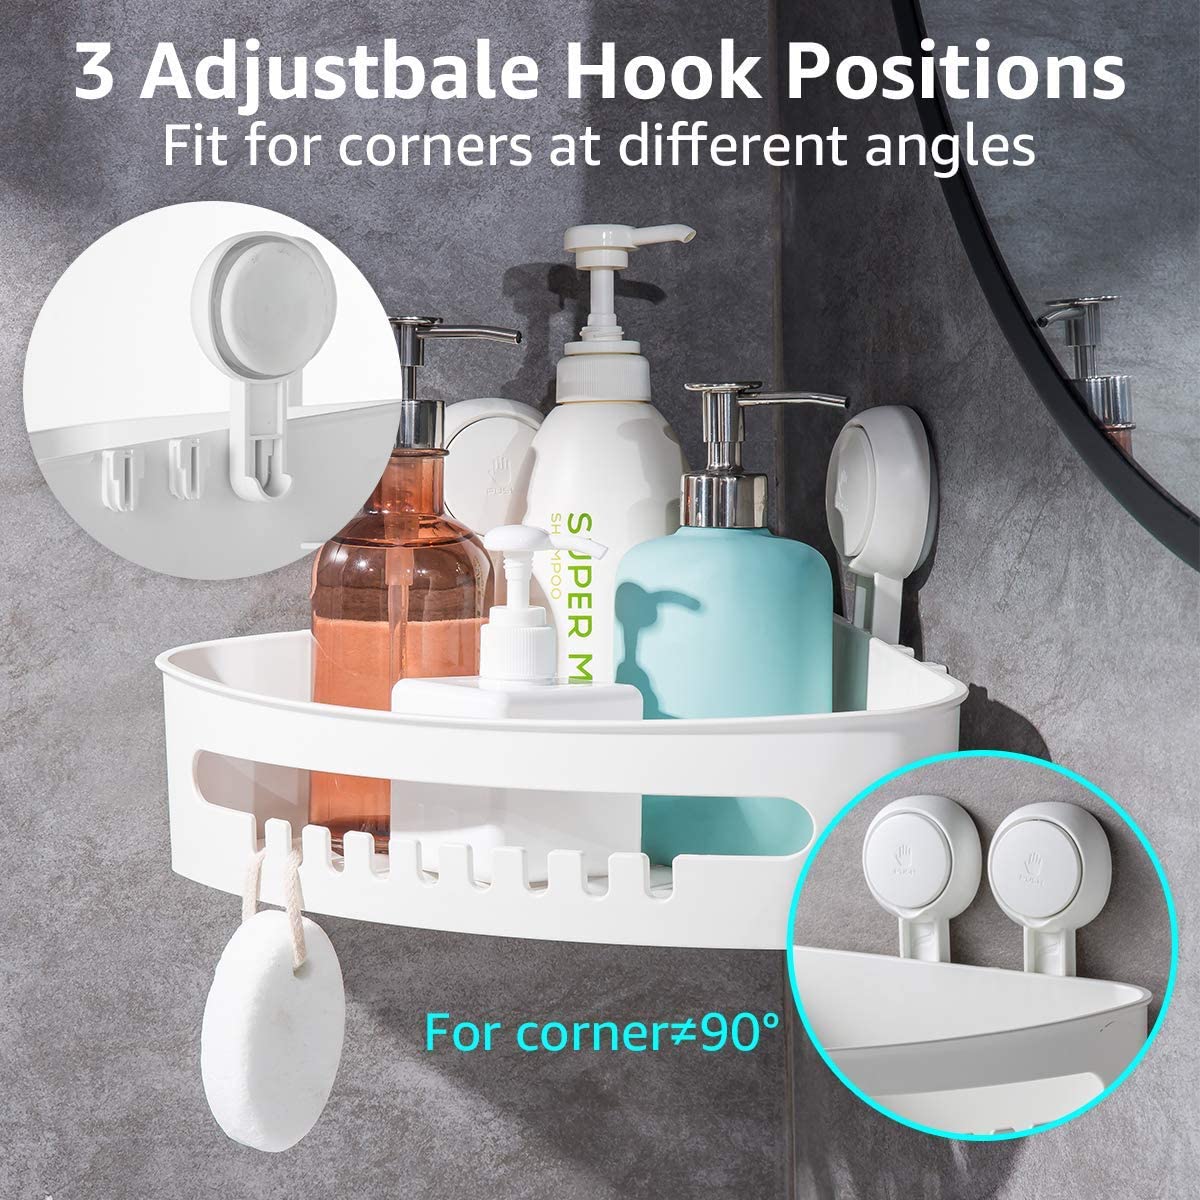 LeverLoc Shower Caddy Suction Cup Shower Shelf Suction Shower Basket One Second Installation Removable Powerful Shower Organizer Max Hold 22lbs Suction